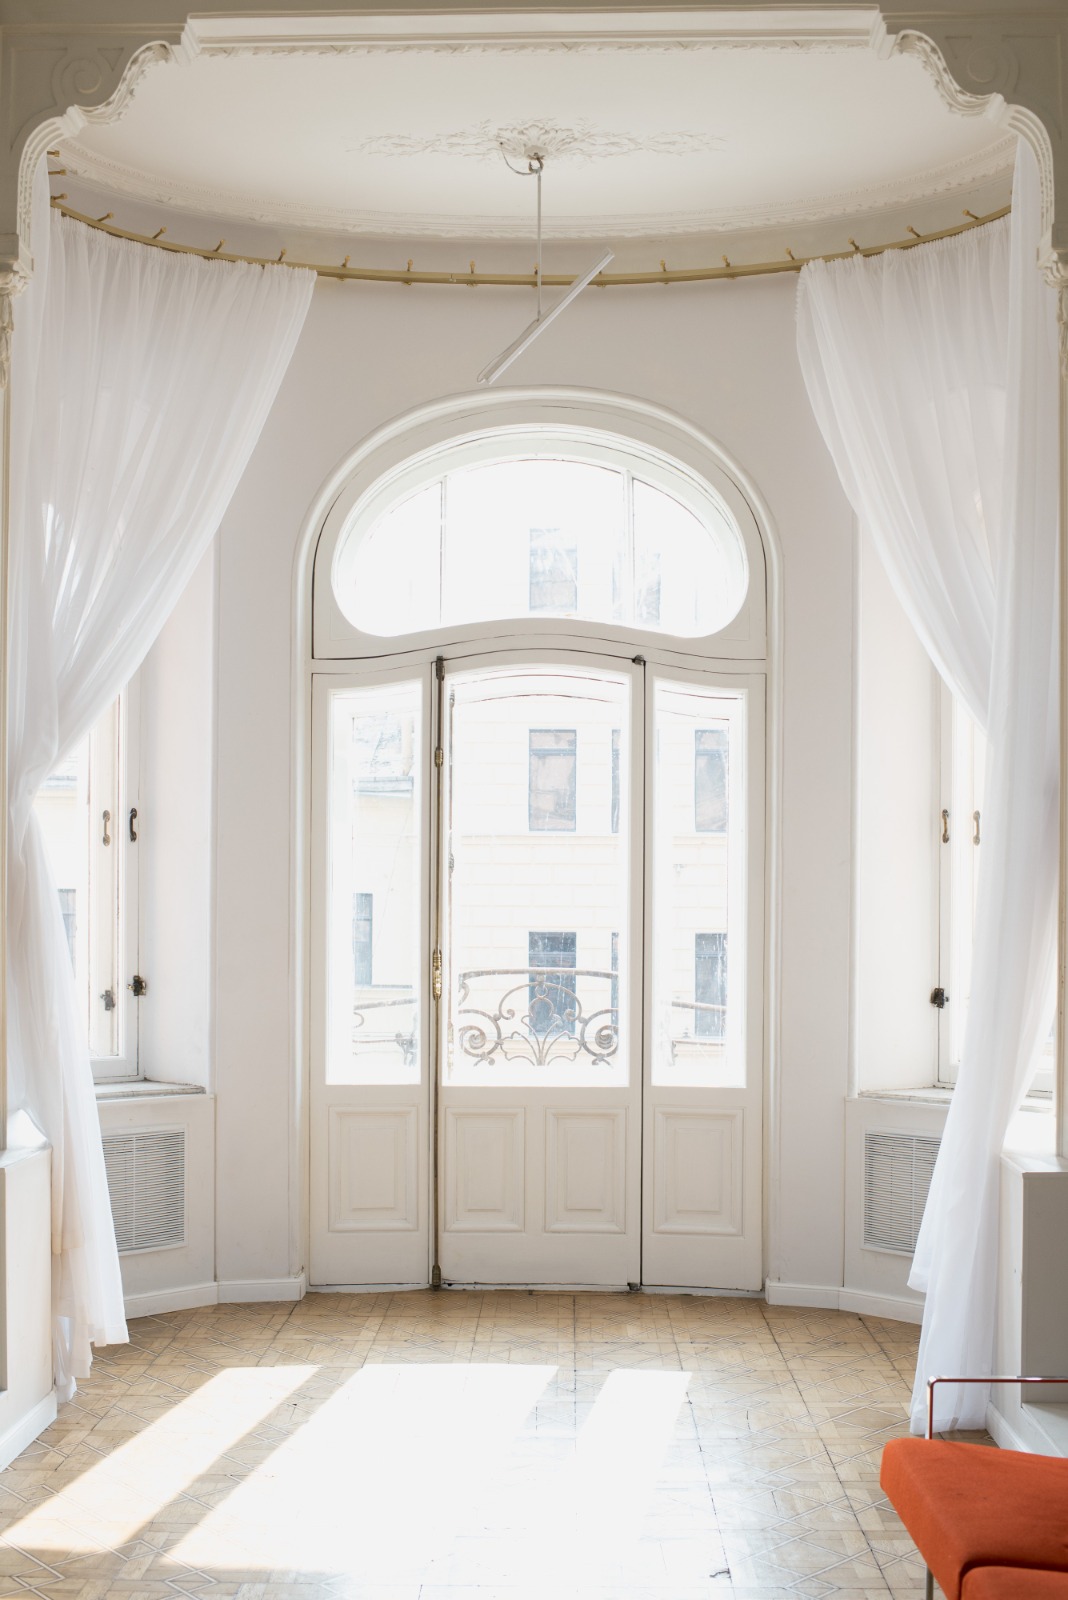 Fashionable curtains for French door